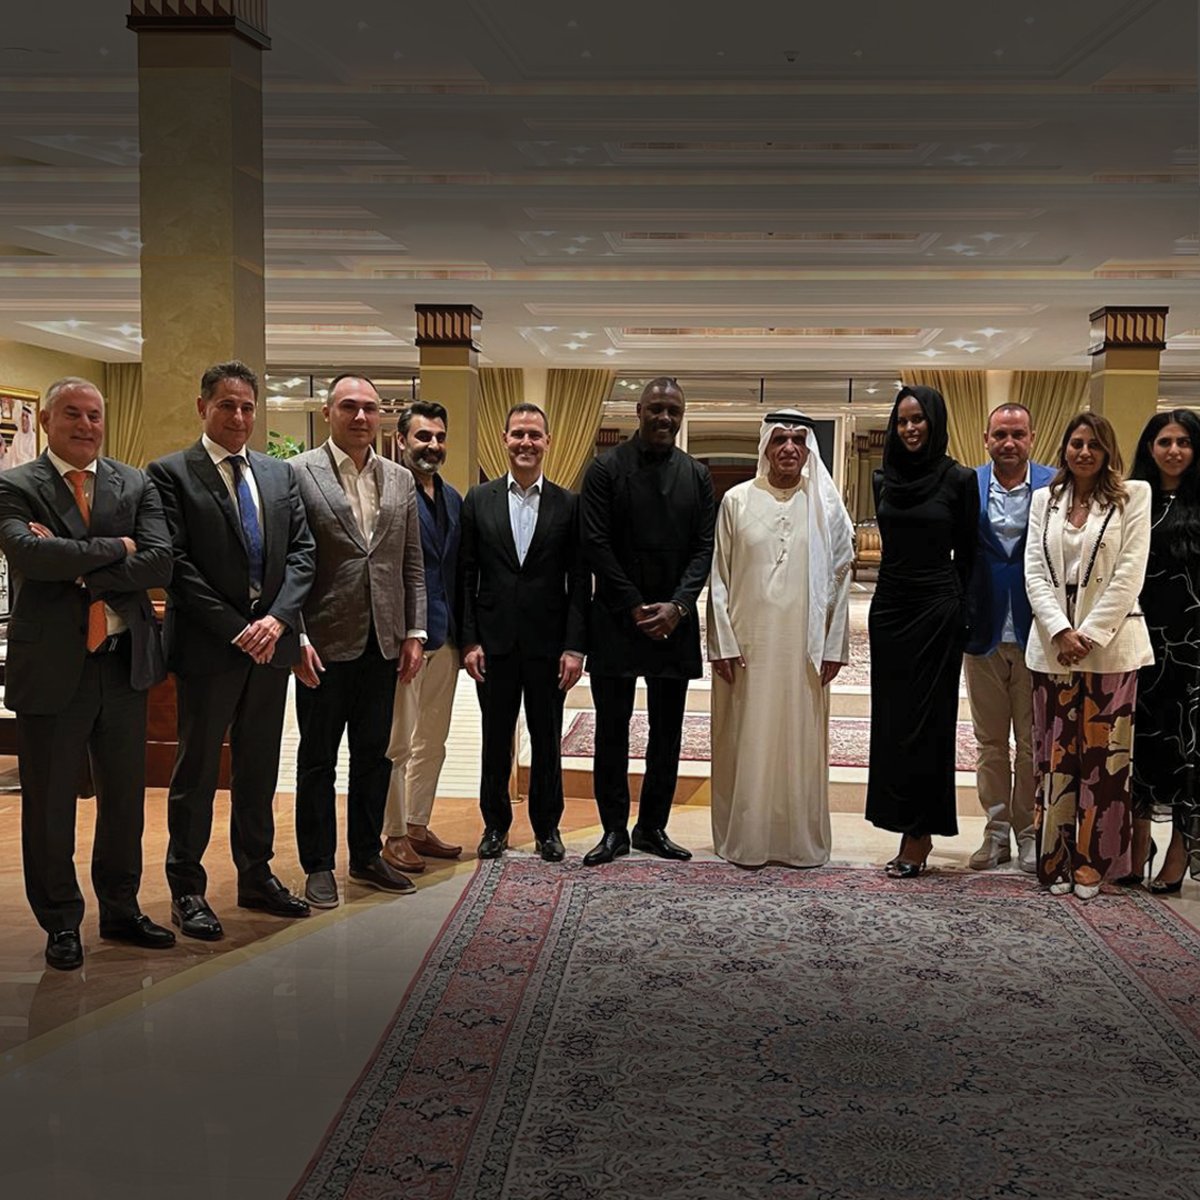 A very productive evening for the Global Citizen Forum team at the Palace of His Highness Sheikh Saud bin Saqr Al Qasimi, UAE Supreme Council Member and Ruler of Ras Al Khaimah.